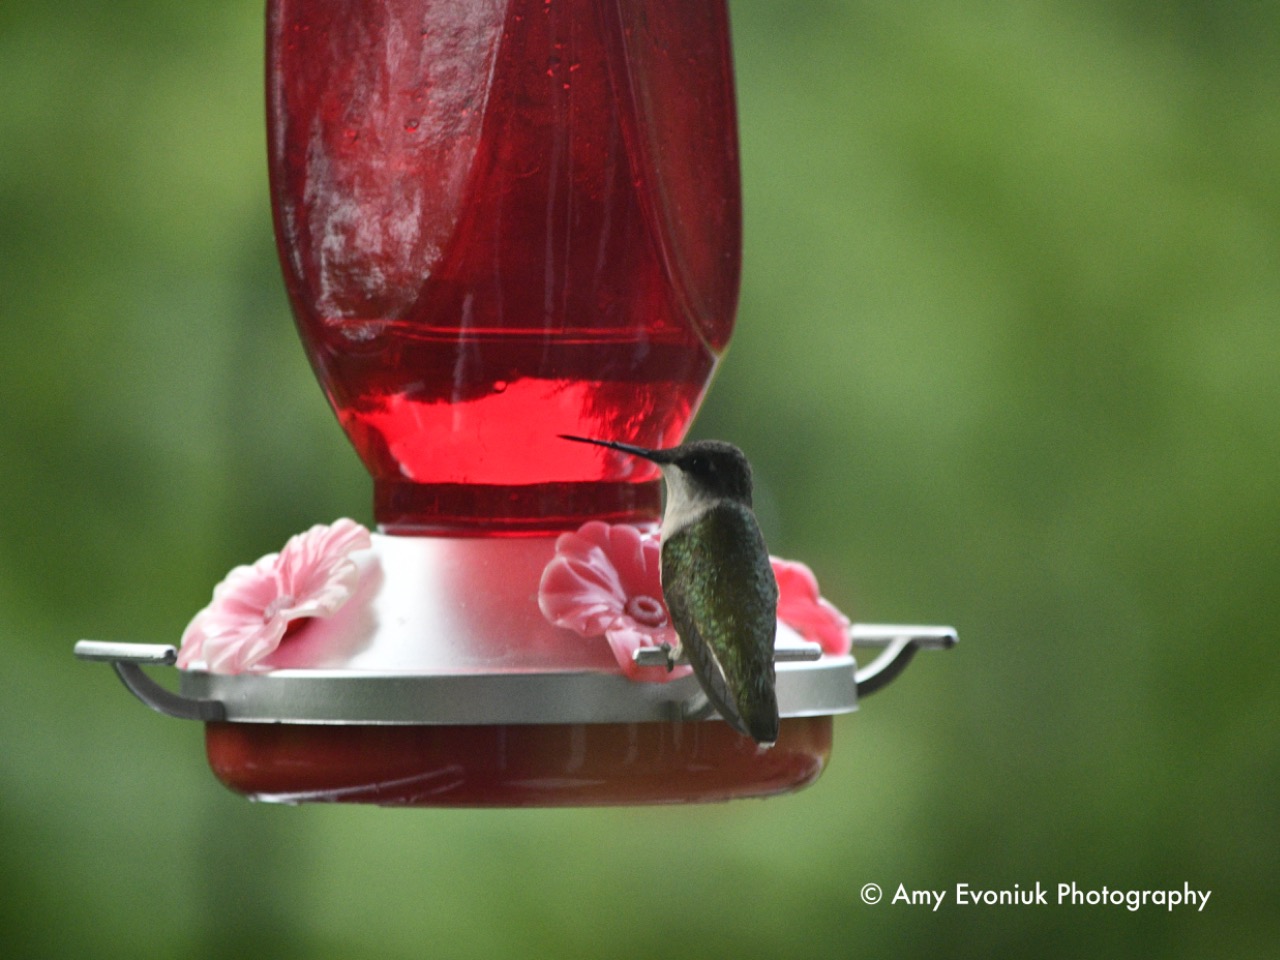 A hummingbird on a red feeder. Watermark Amy Evoniuk Photography